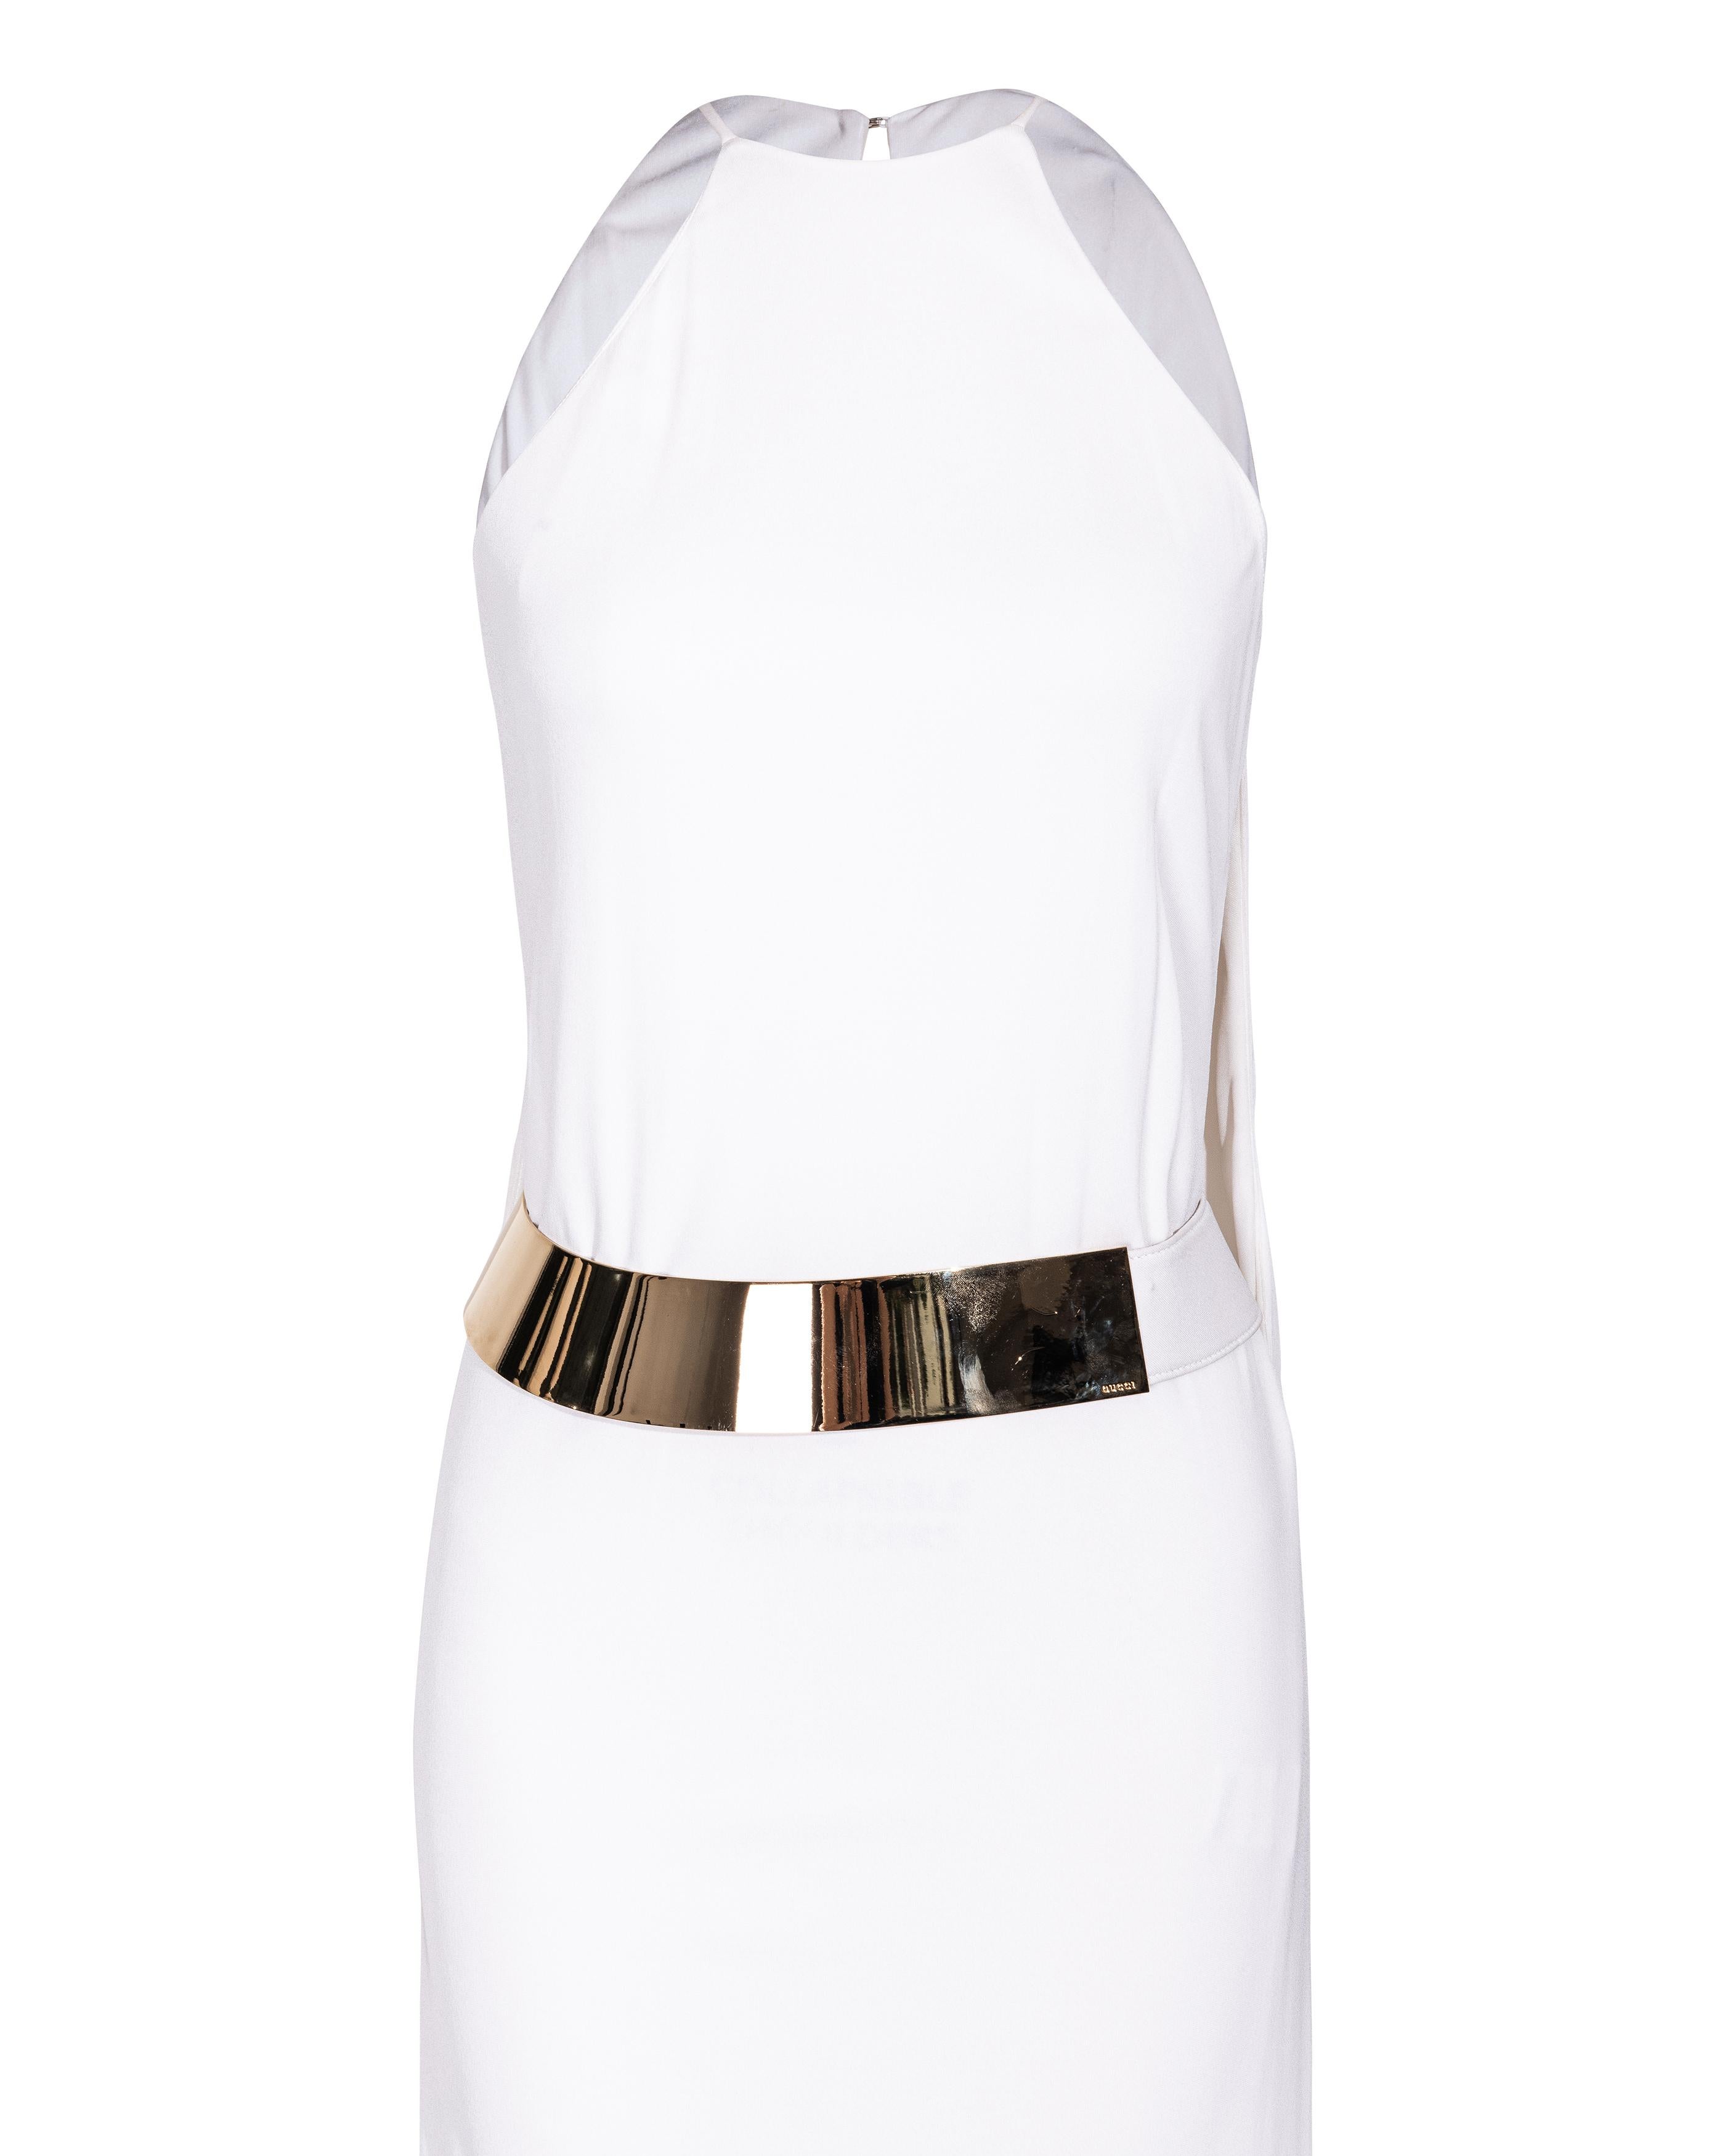 A/W 1996 Gucci by Tom Ford White Gown with Curved Gold Belt 4